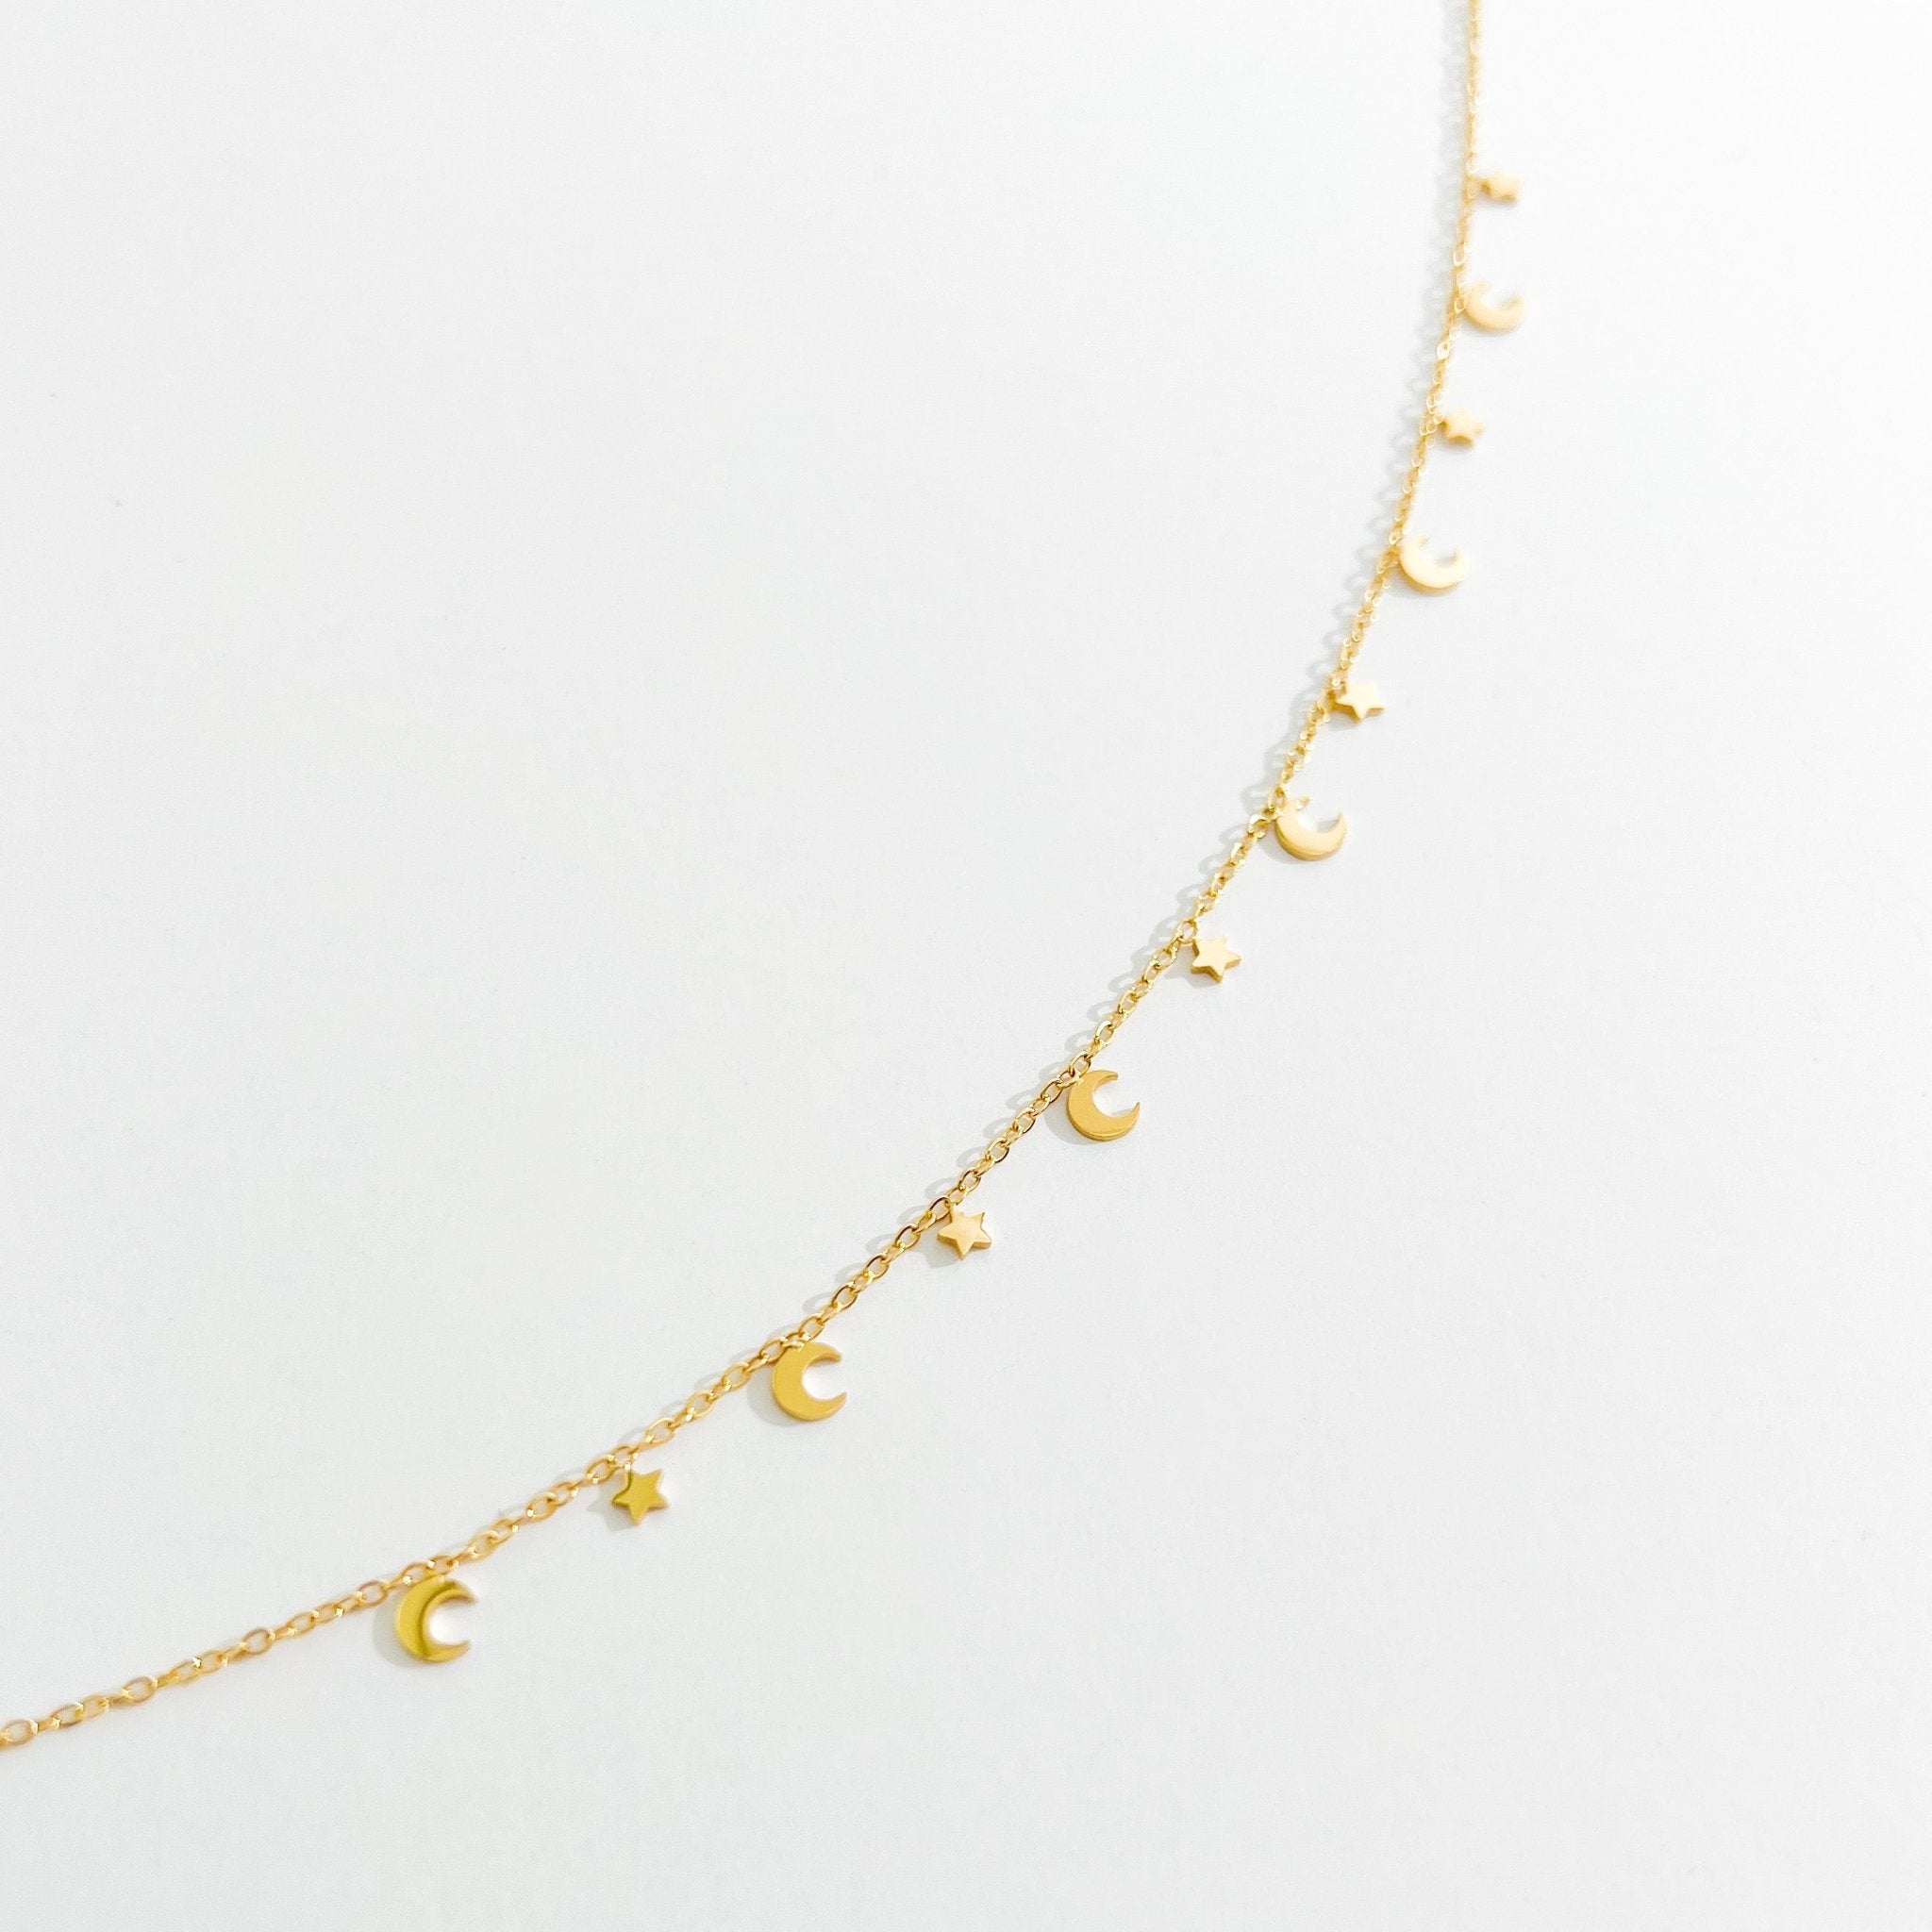 Twinkling Sky Necklace in Gold - Flaire & Co.